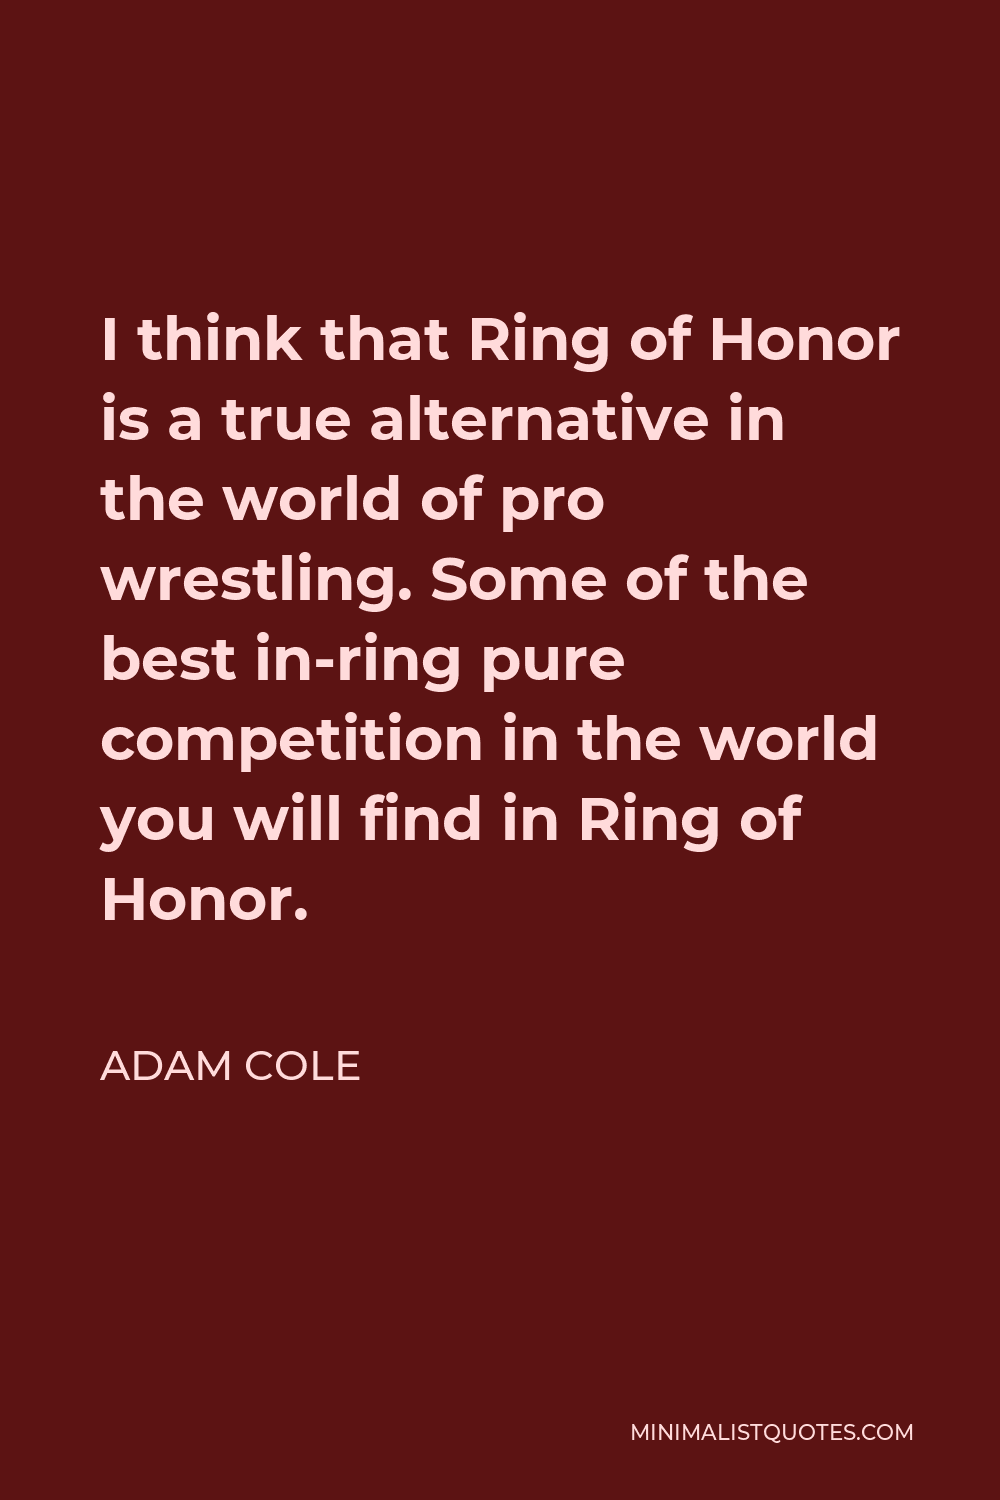 Adam Cole Quote - I think that Ring of Honor is a true alternative in the world of pro wrestling. Some of the best in-ring pure competition in the world you will find in Ring of Honor.